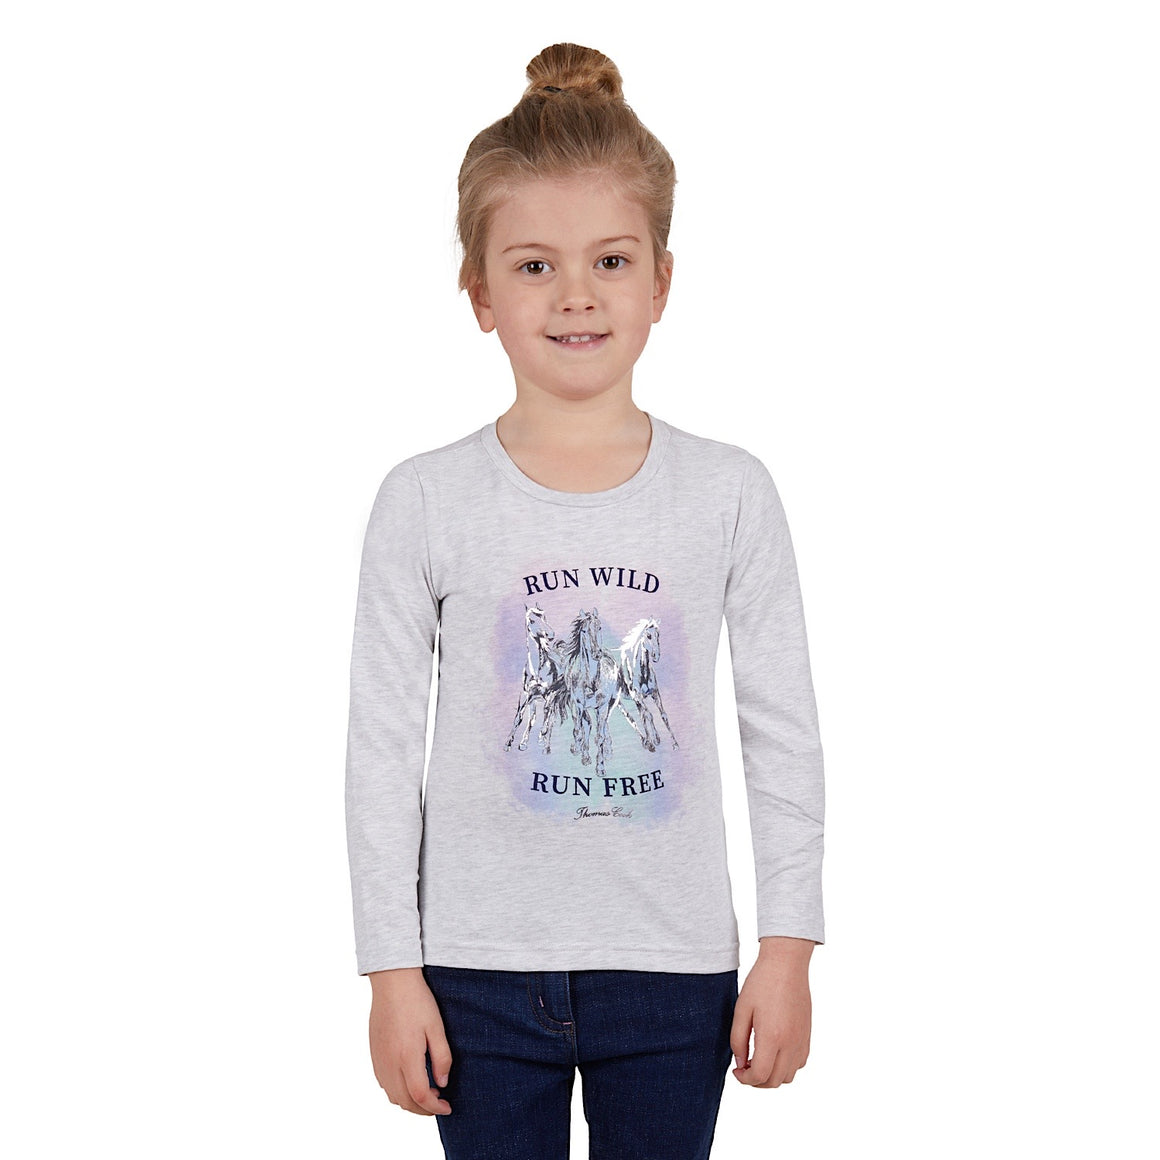 Thomas Cook Girls Tilly Long Sleeve Tee White Marle